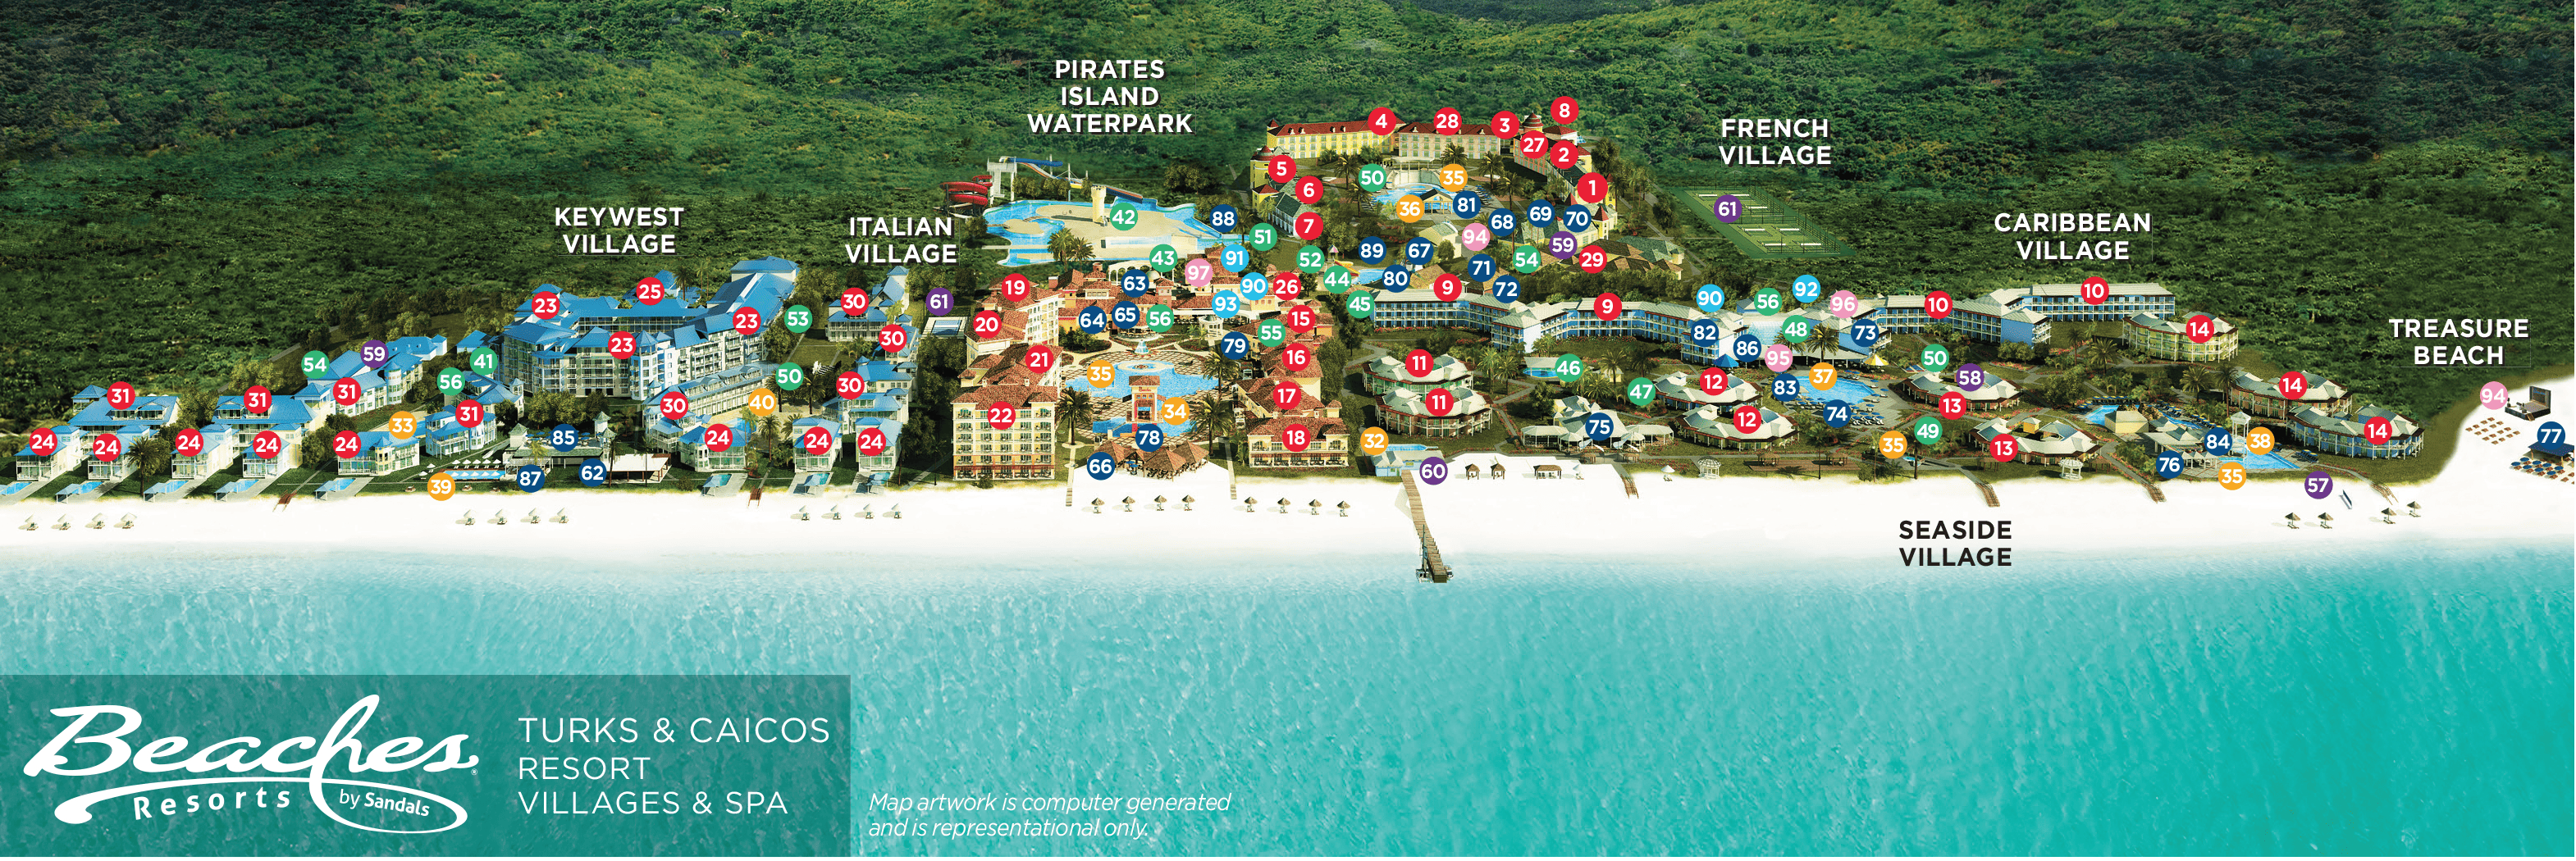 Beaches Resort Map, Turks and Caicos